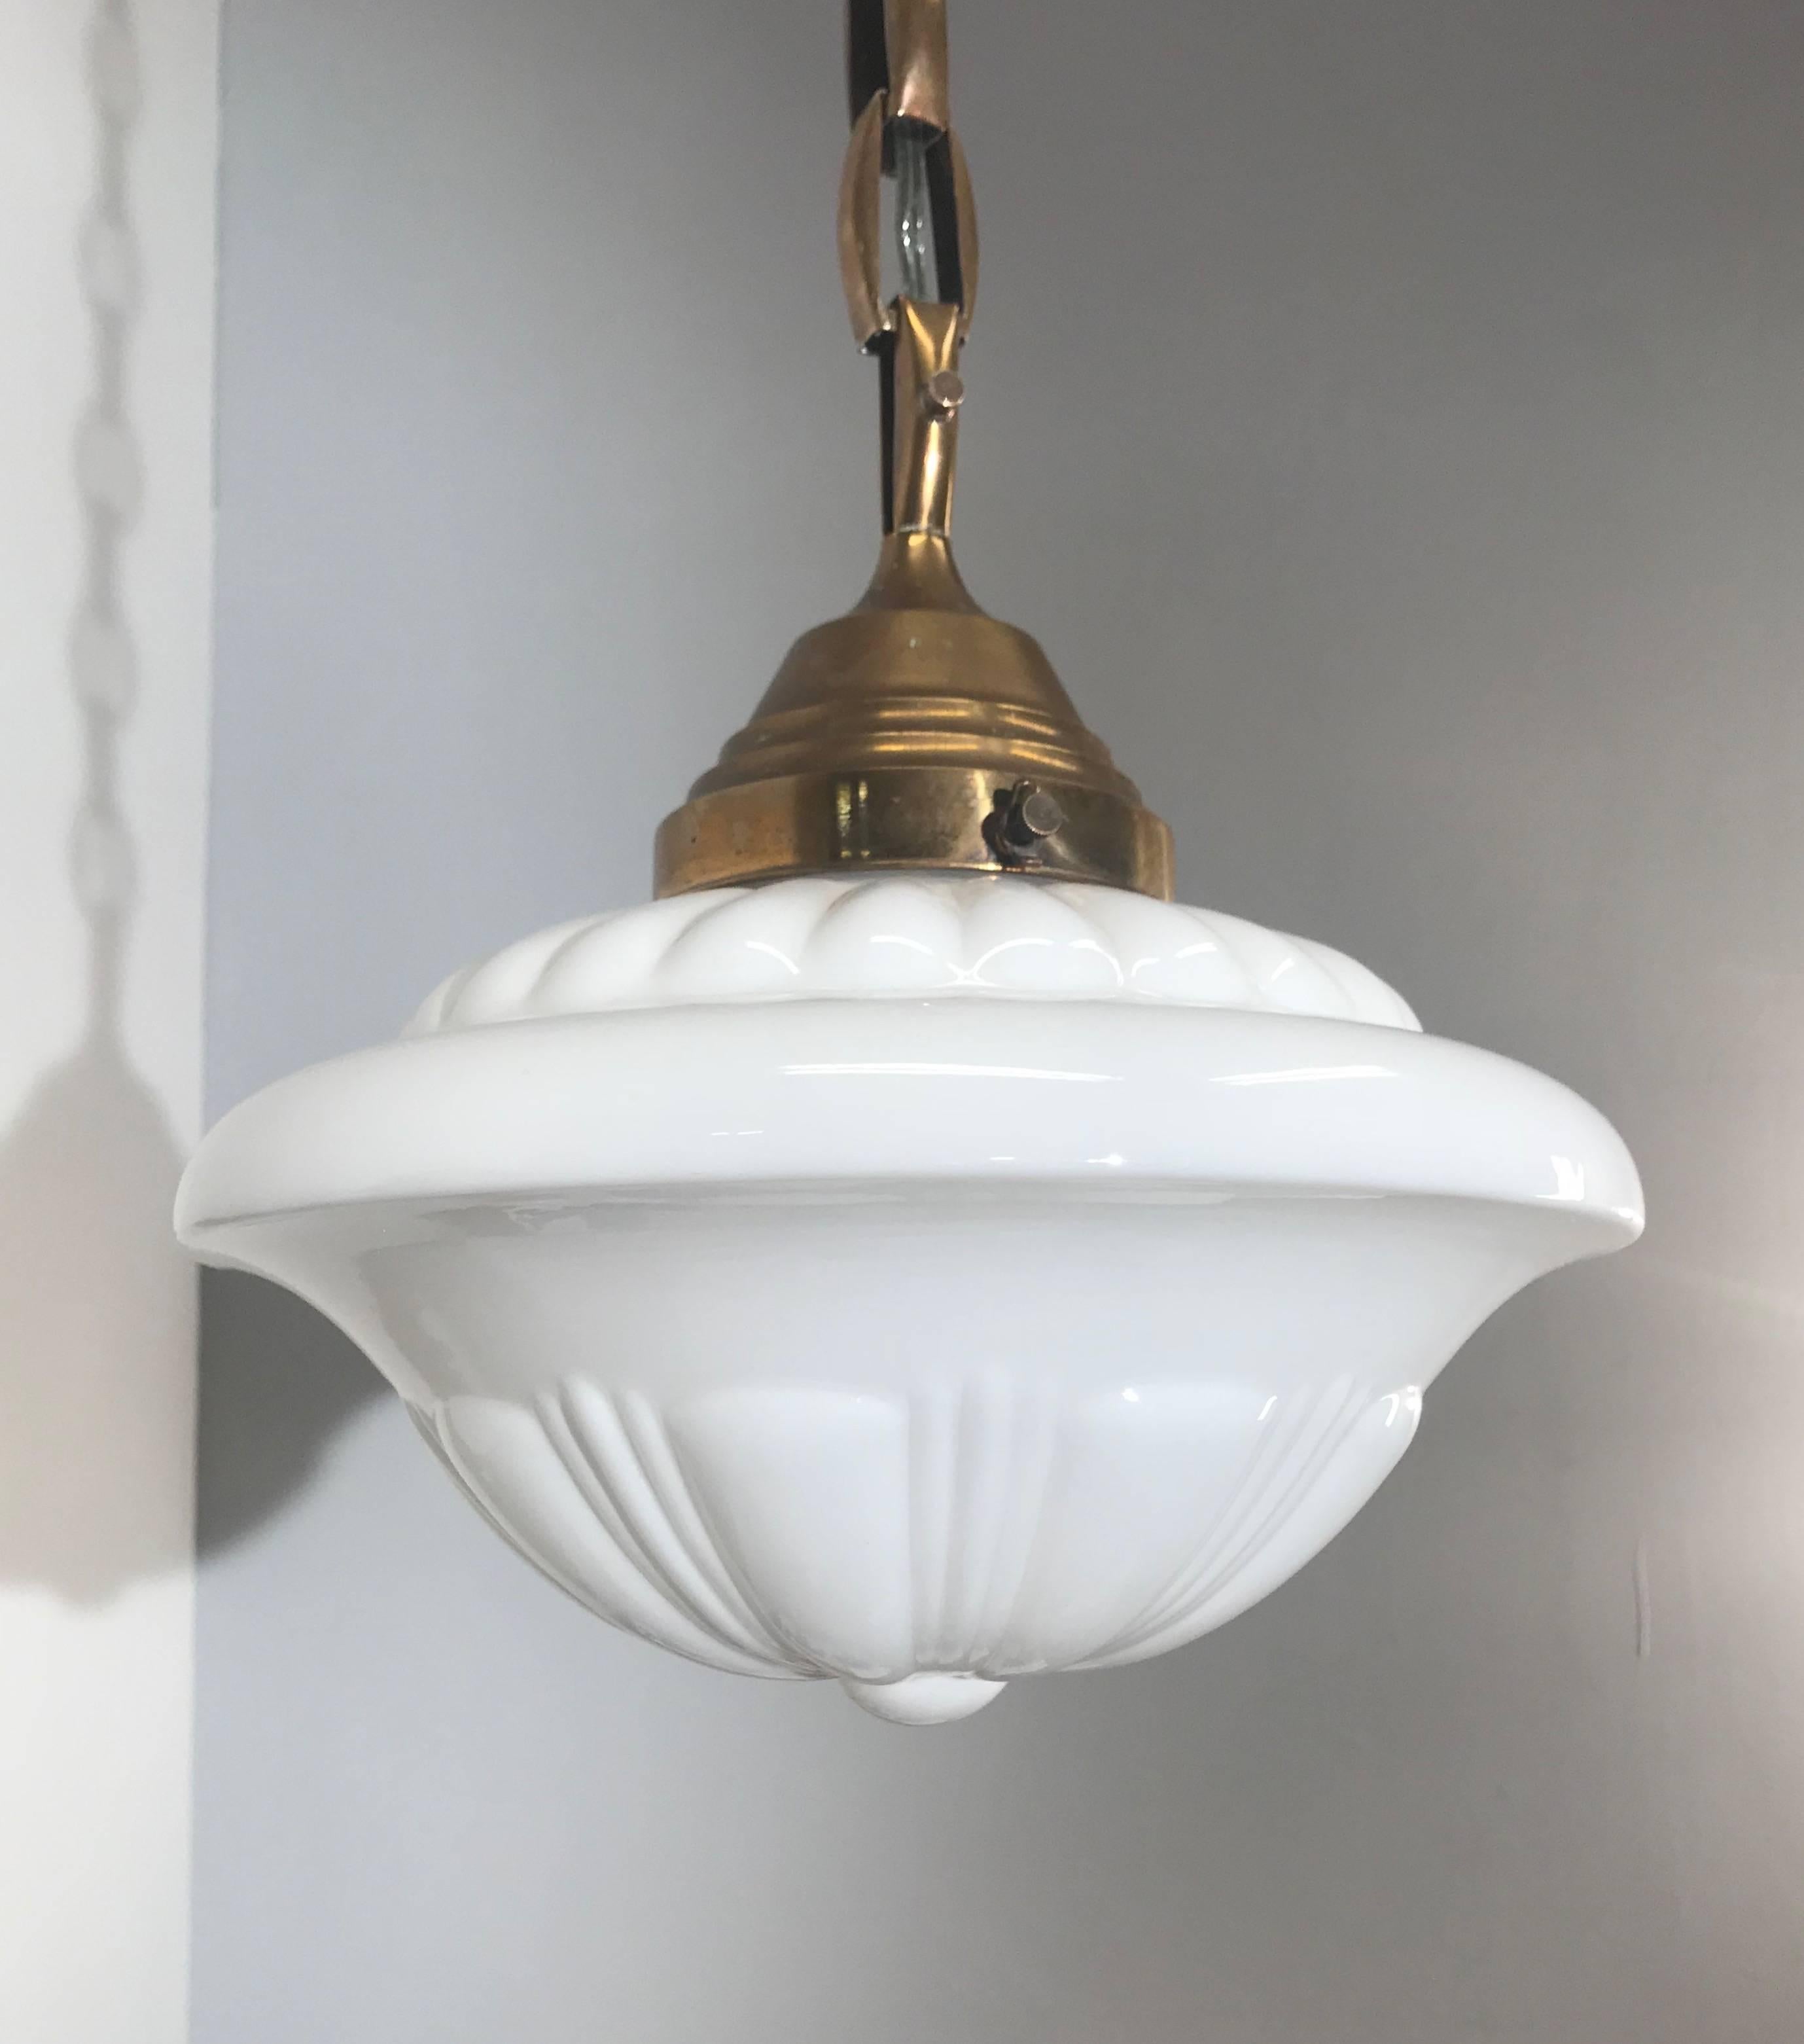 Highly stylish glass-art pendant light. 

This unique and stunning 1920s Art Deco pendant is of museum quality and condition. The combination of the beautifully designed, clean white shade and the excellent brass chain is a match made in heaven.